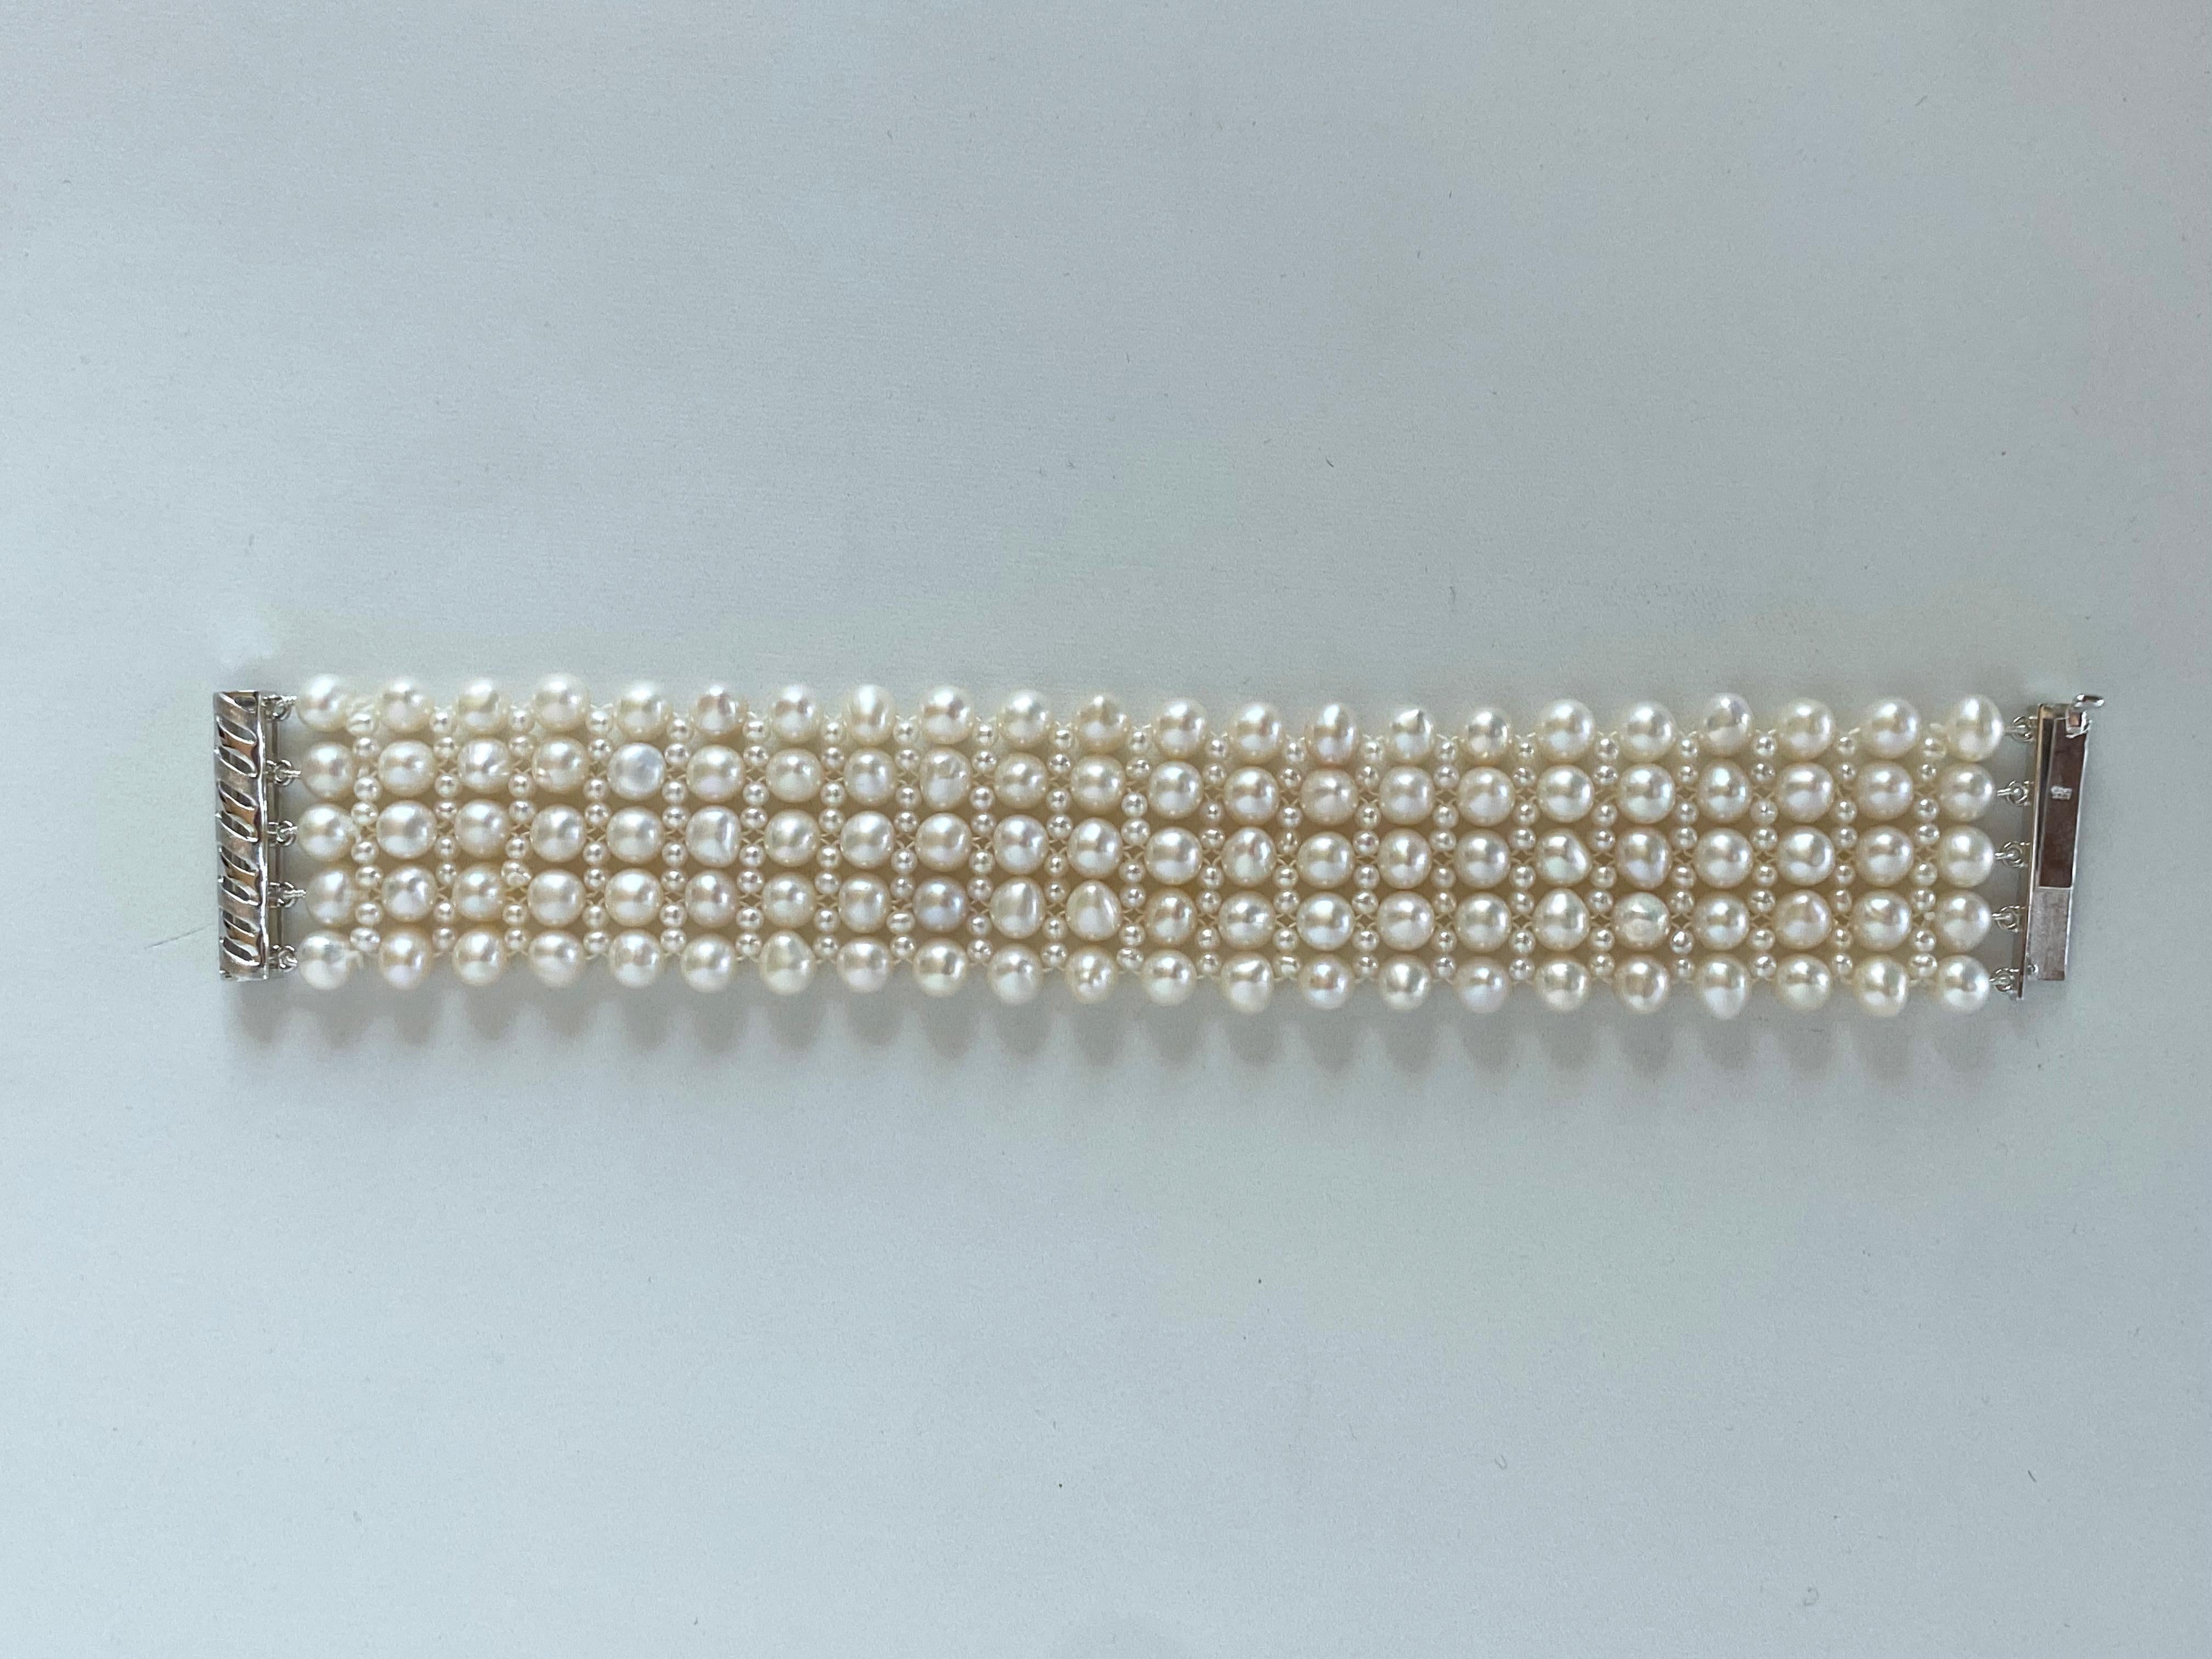 Bead Marina J. Woven Pearl Wedding Bracelet with Rhodium Plated Silver Clasp For Sale